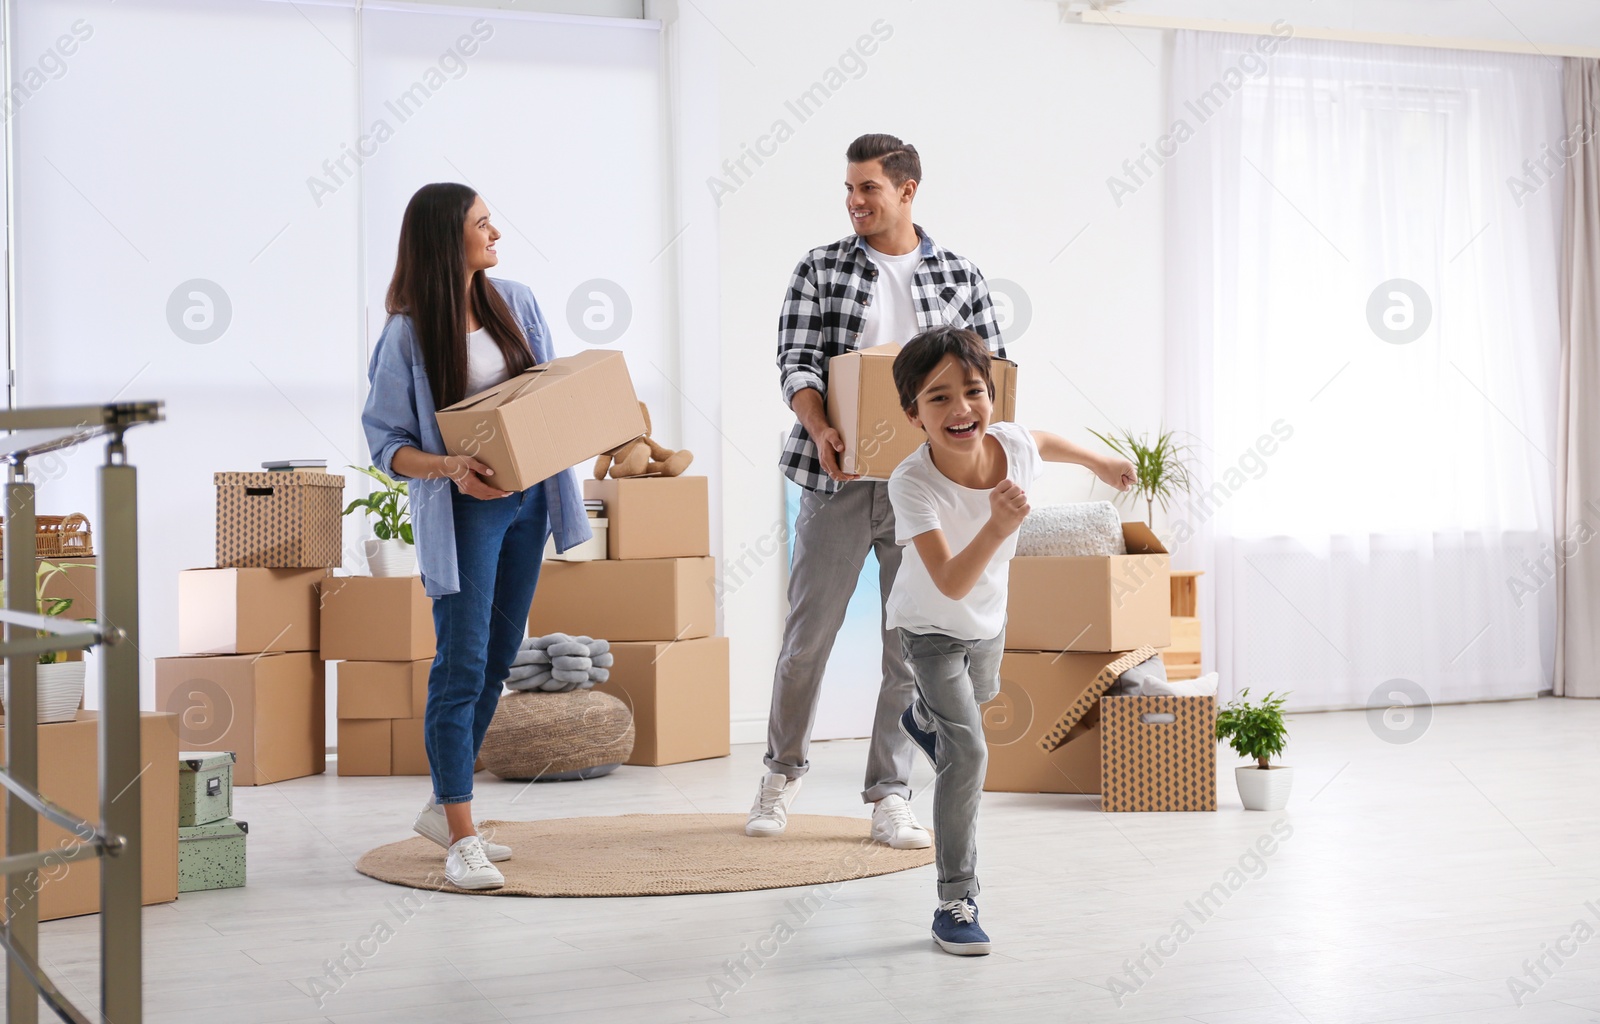 Photo of Happy family in room with cardboard boxes on moving day